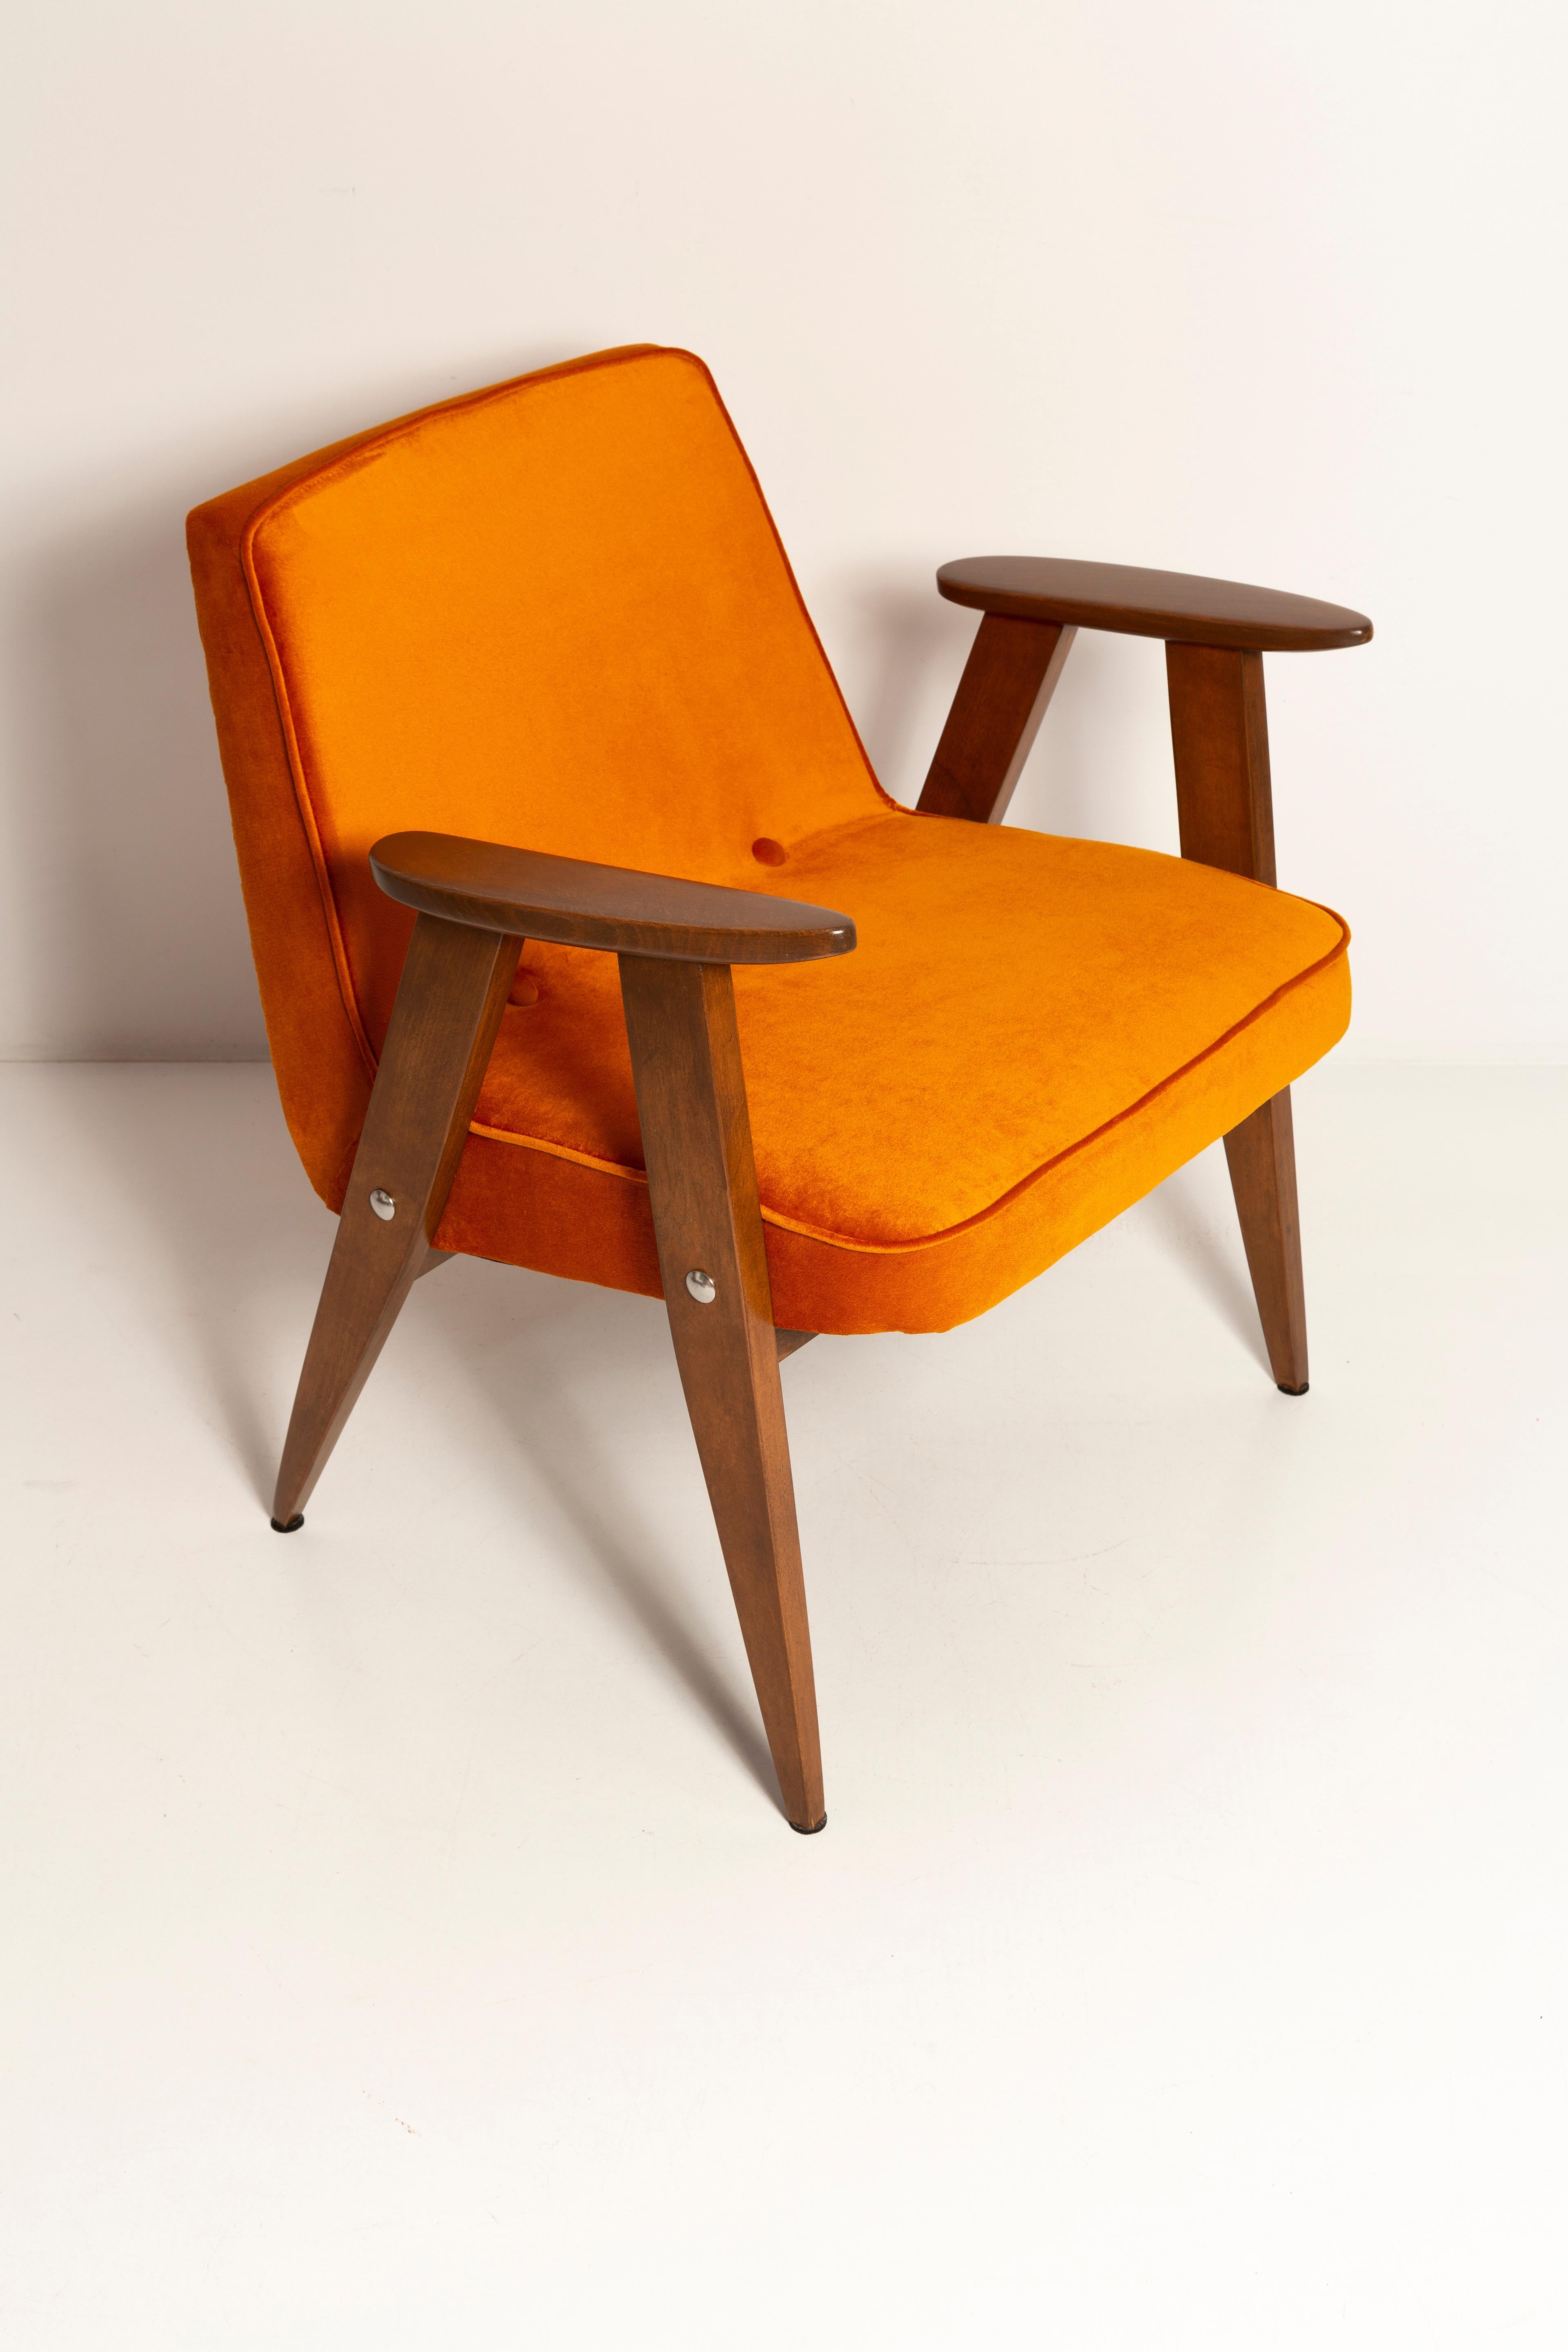 Pair of Mid-Century 366 Armchairs, Green and Orange, by Chierowski Europe, 1960s For Sale 2